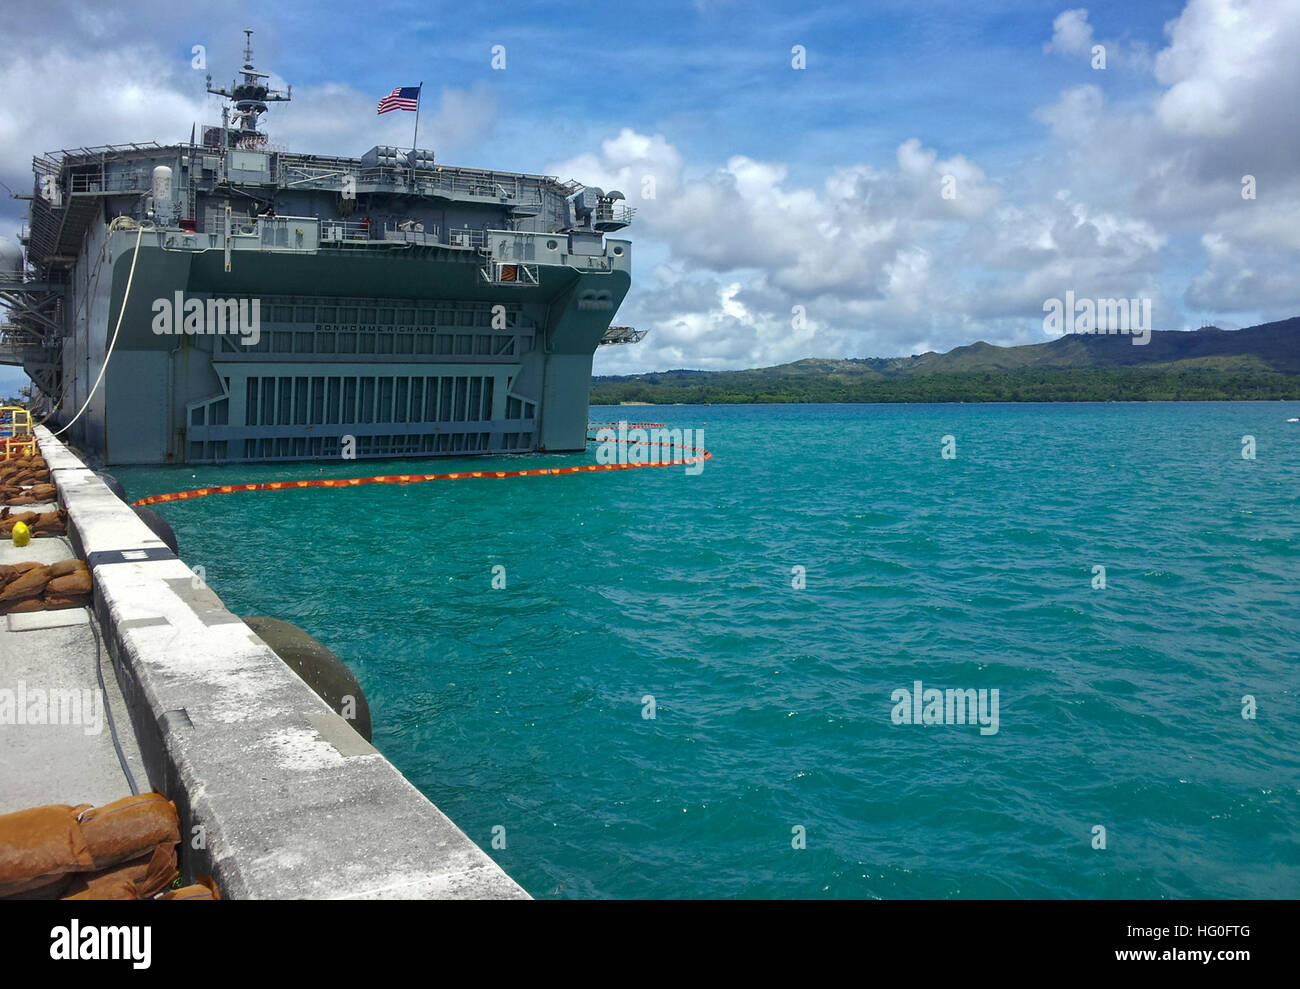 The forward-deployed amphibious assault ship USS Bonhomme Richard (LHD 6) is moored pierside at Naval Base Guam for a scheduled port visit. Bonhomme Richard, commanded by Capt. Daniel Dusek, is the lead ship of the only forward-deployed amphibious ready group and is currently operating in the 7th Fleet Area of Operations. (U.S. Navy photo by Mass Communication Specialist 2nd Class Michael Russell) USS Bonhomme Richard in Guam 120927-N-KB563-001 Stock Photo